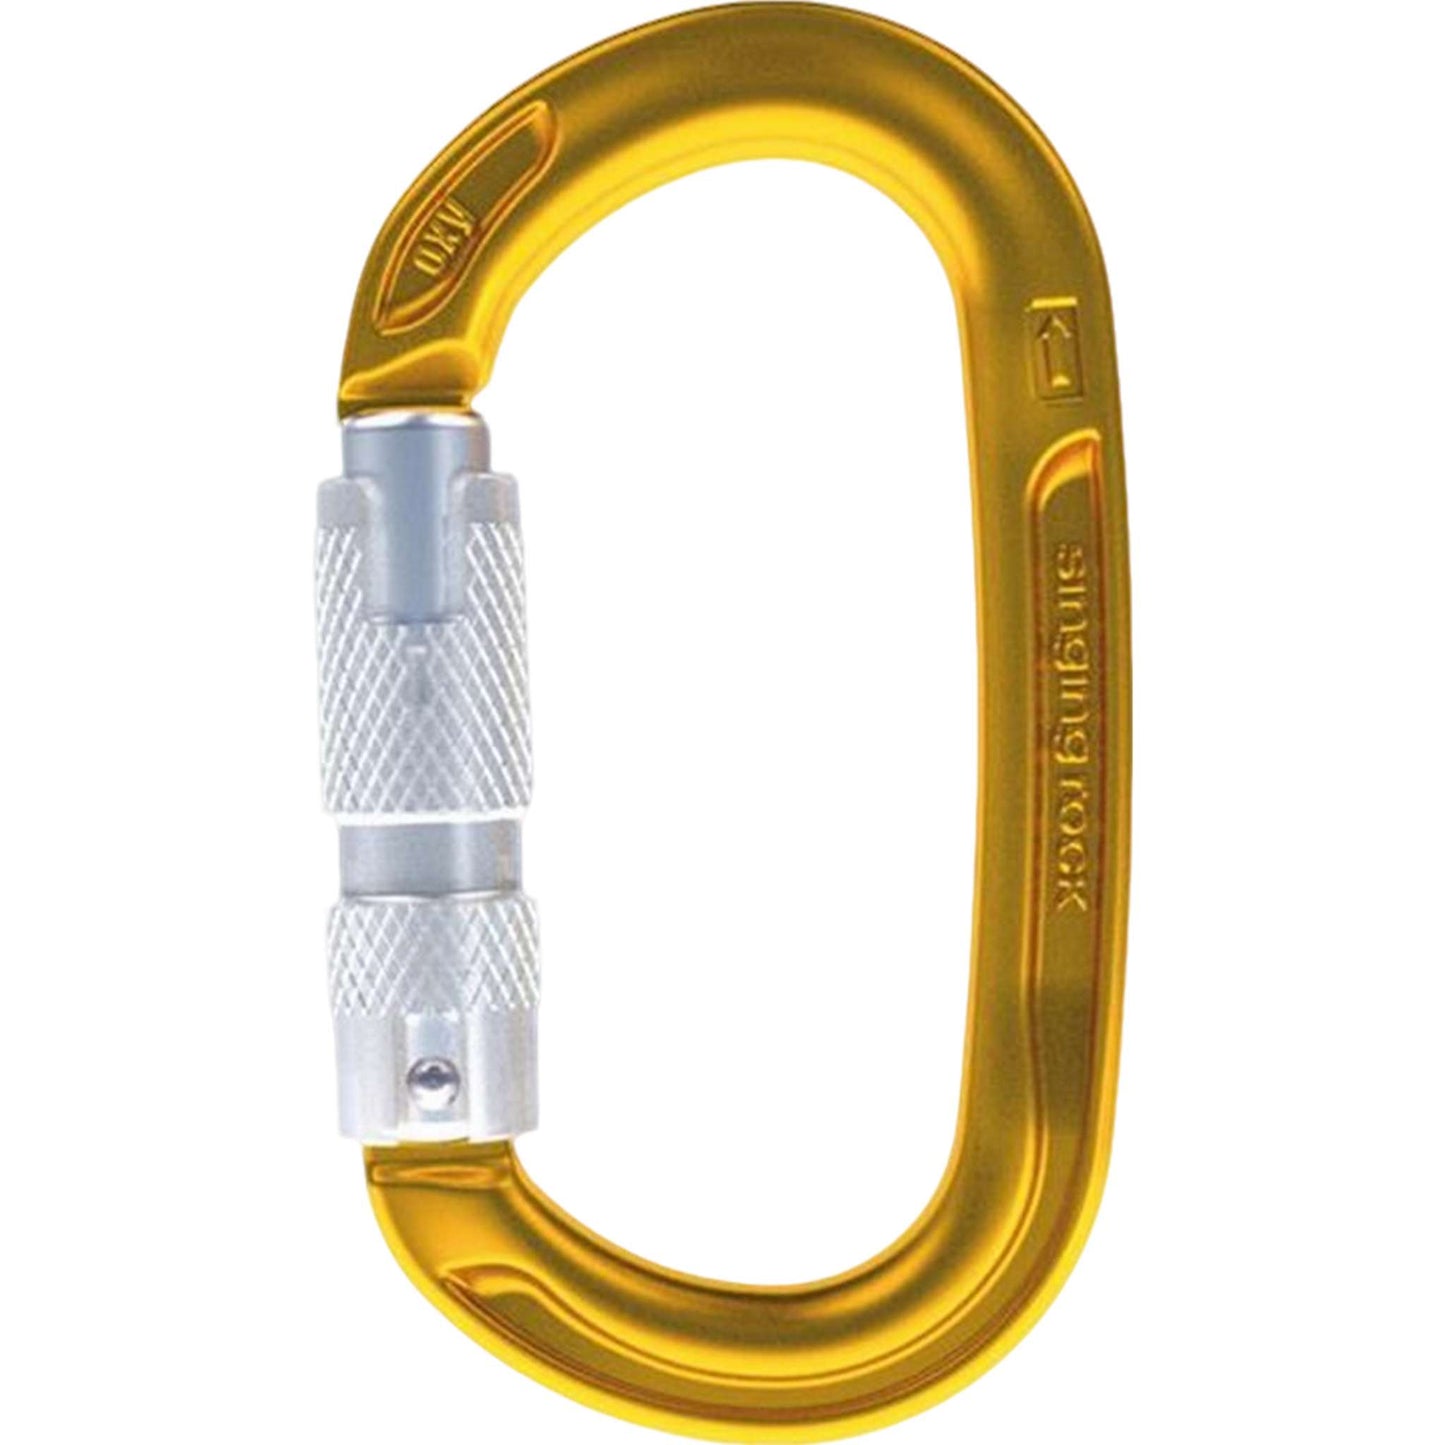 OXY Triple Lock Carabiner - Hot-Forged Light Alloy for Climbing Efficiency